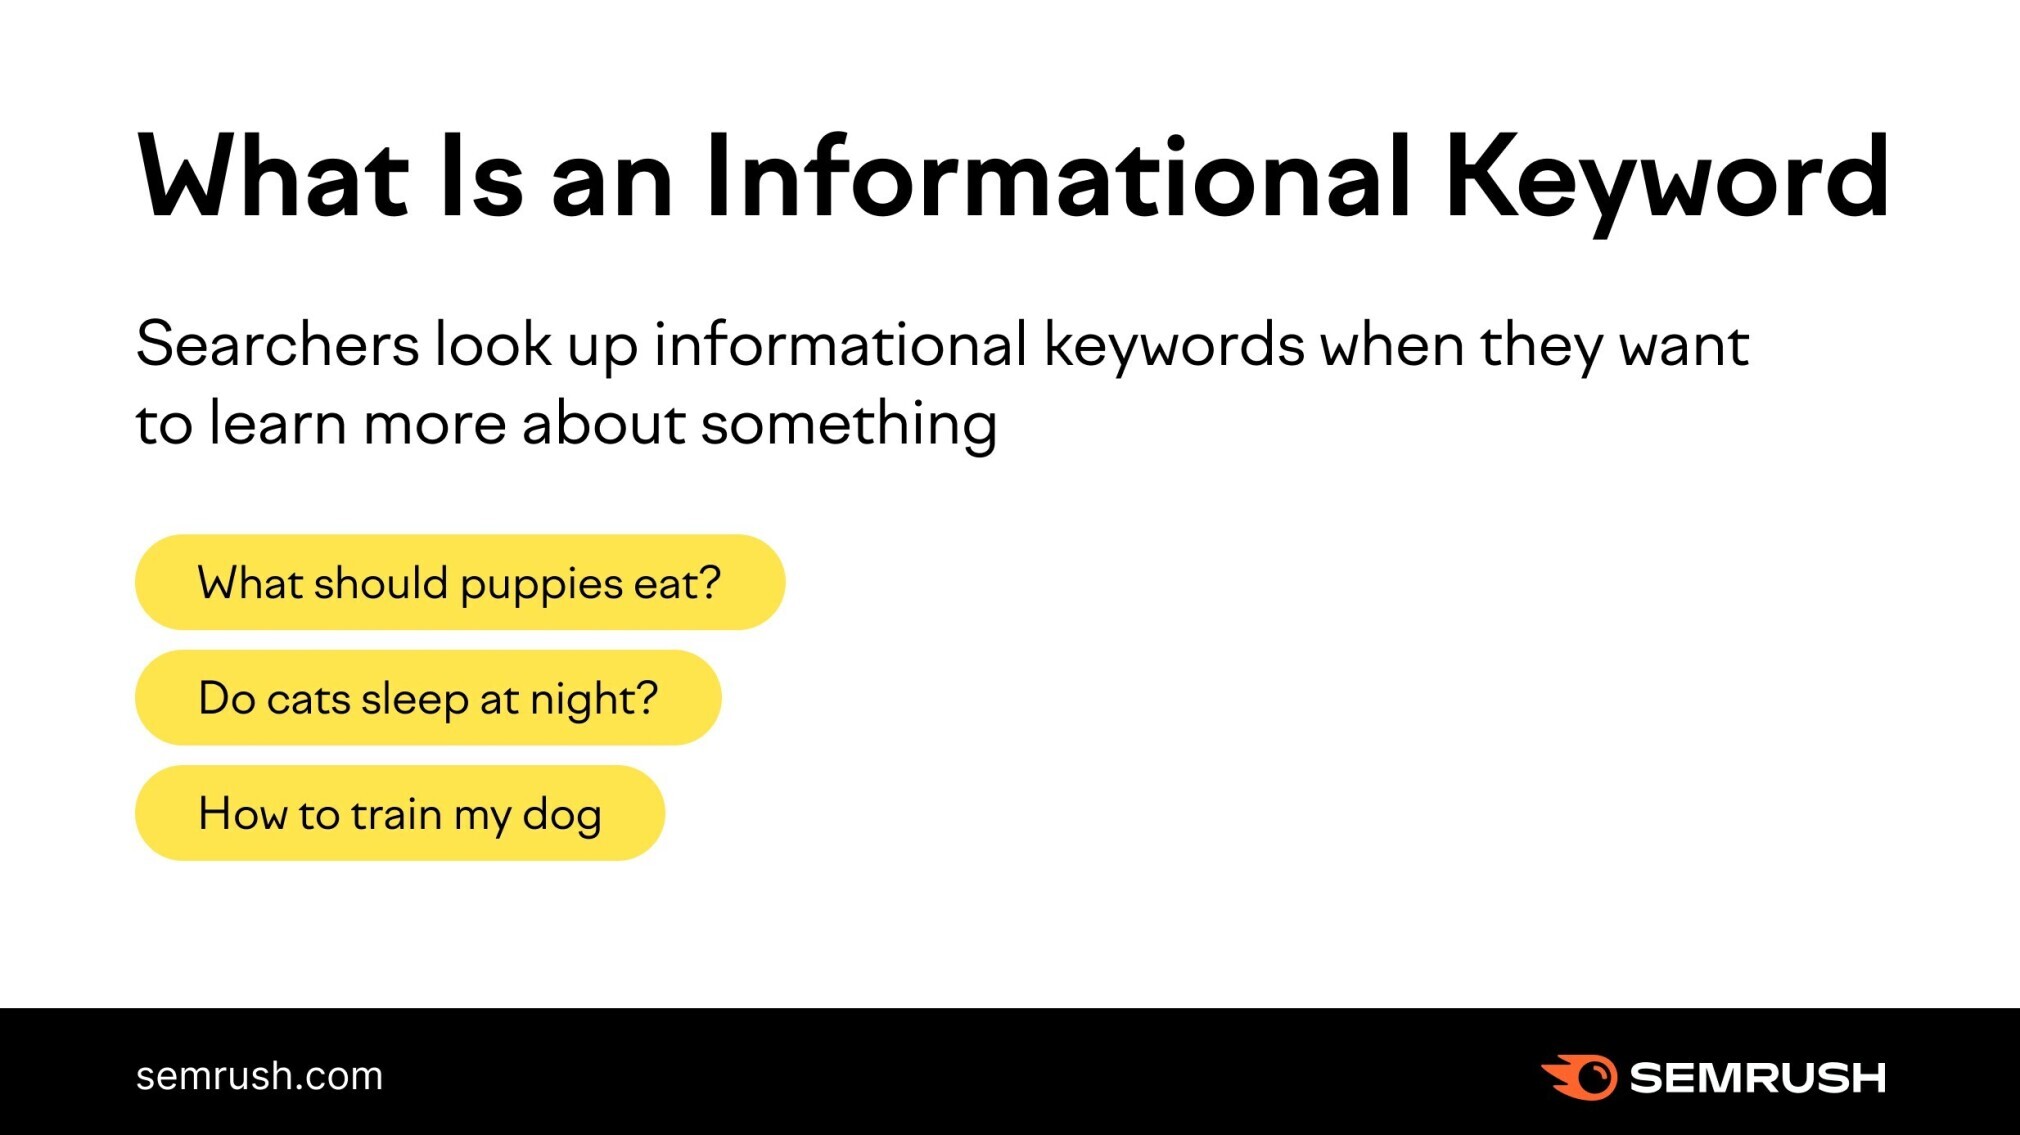 The description of an informational keyword and some examples